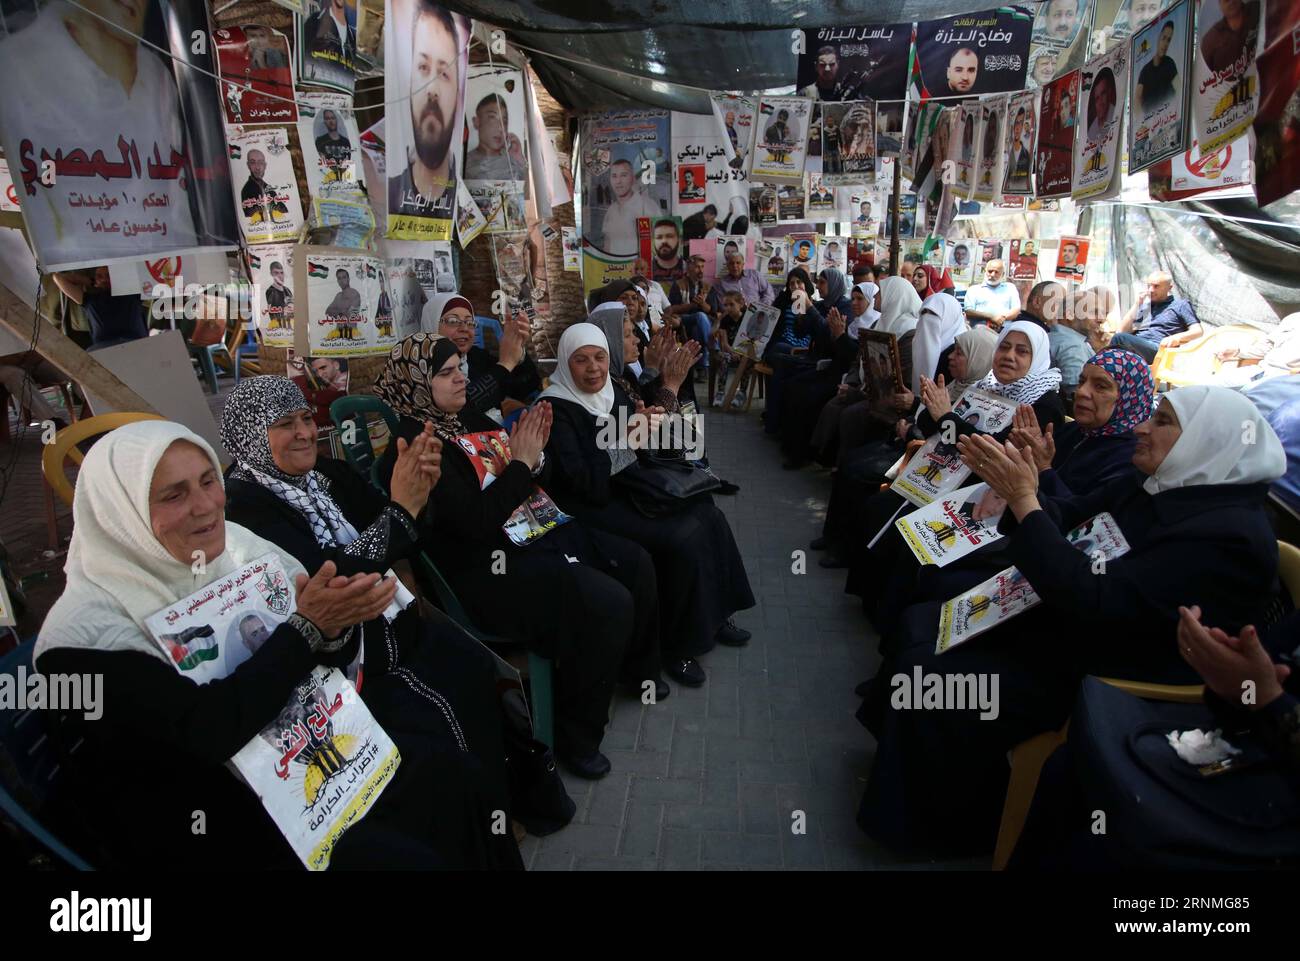 (170527) -- NABLUS, May 27, 2017 -- Palestinian women hold pictures of their jailed families, as they celebrate during a protest in solidarity with prisoners in Israeli jails, in the West Bank City of Nablus, on May 27, 2017. Palestinian Fatah Party Recruitment Commissioner Jamal Muheisen declared that over 1,500 Palestinian prisoners in Israeli jails have suspended their hunger strike after a deal with the Israeli Prisons Authority. )(yk) MIDEAST-NABLUS-PRISONERS AymanxNobani PUBLICATIONxNOTxINxCHN   Nablus May 27 2017 PALESTINIAN Women Hold Pictures of their jailed families As They Celebrate Stock Photo